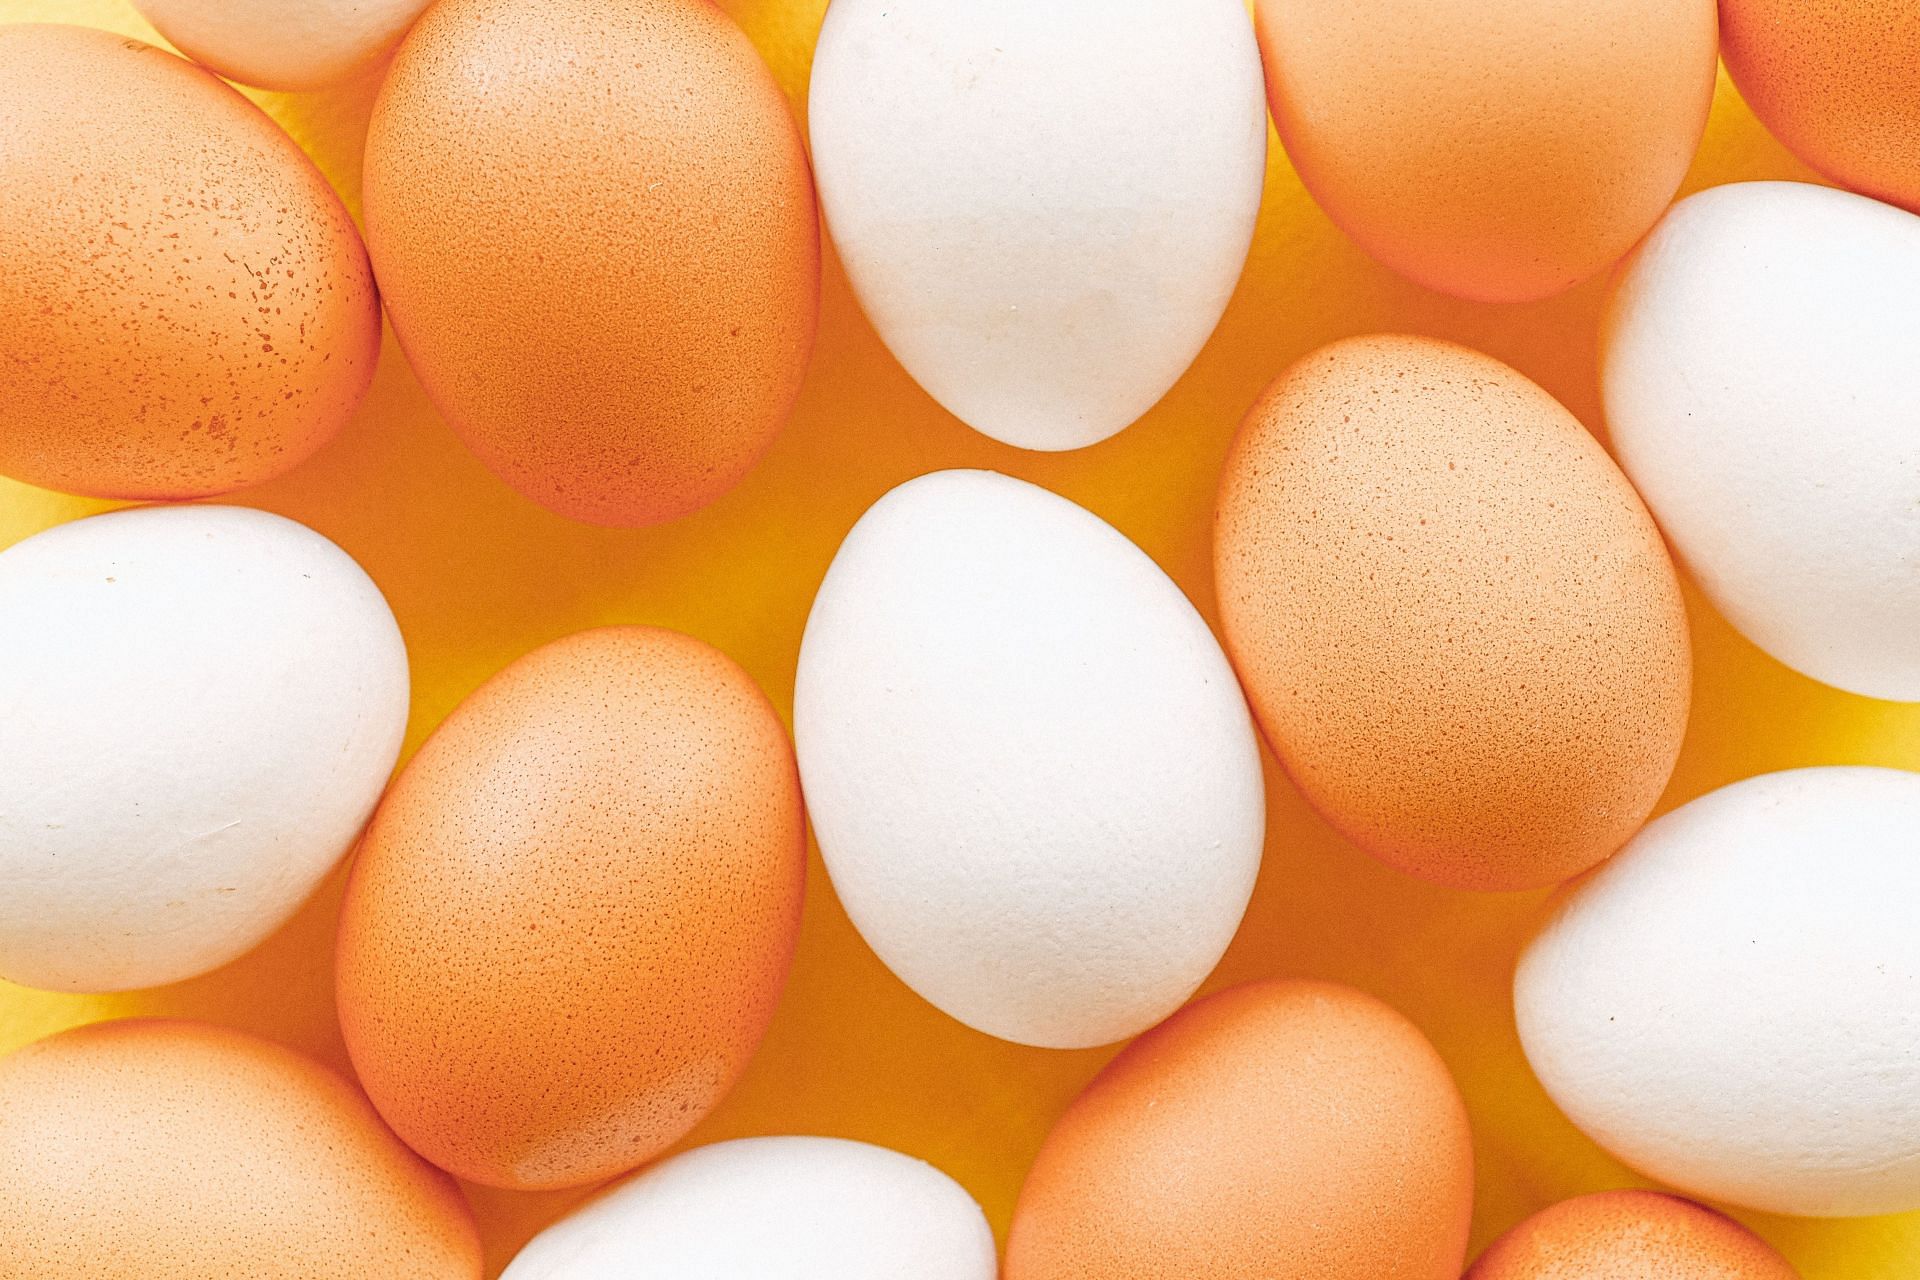 Egg allergy is the most common food allergies. (Image via Pexels / Anna Shevts)